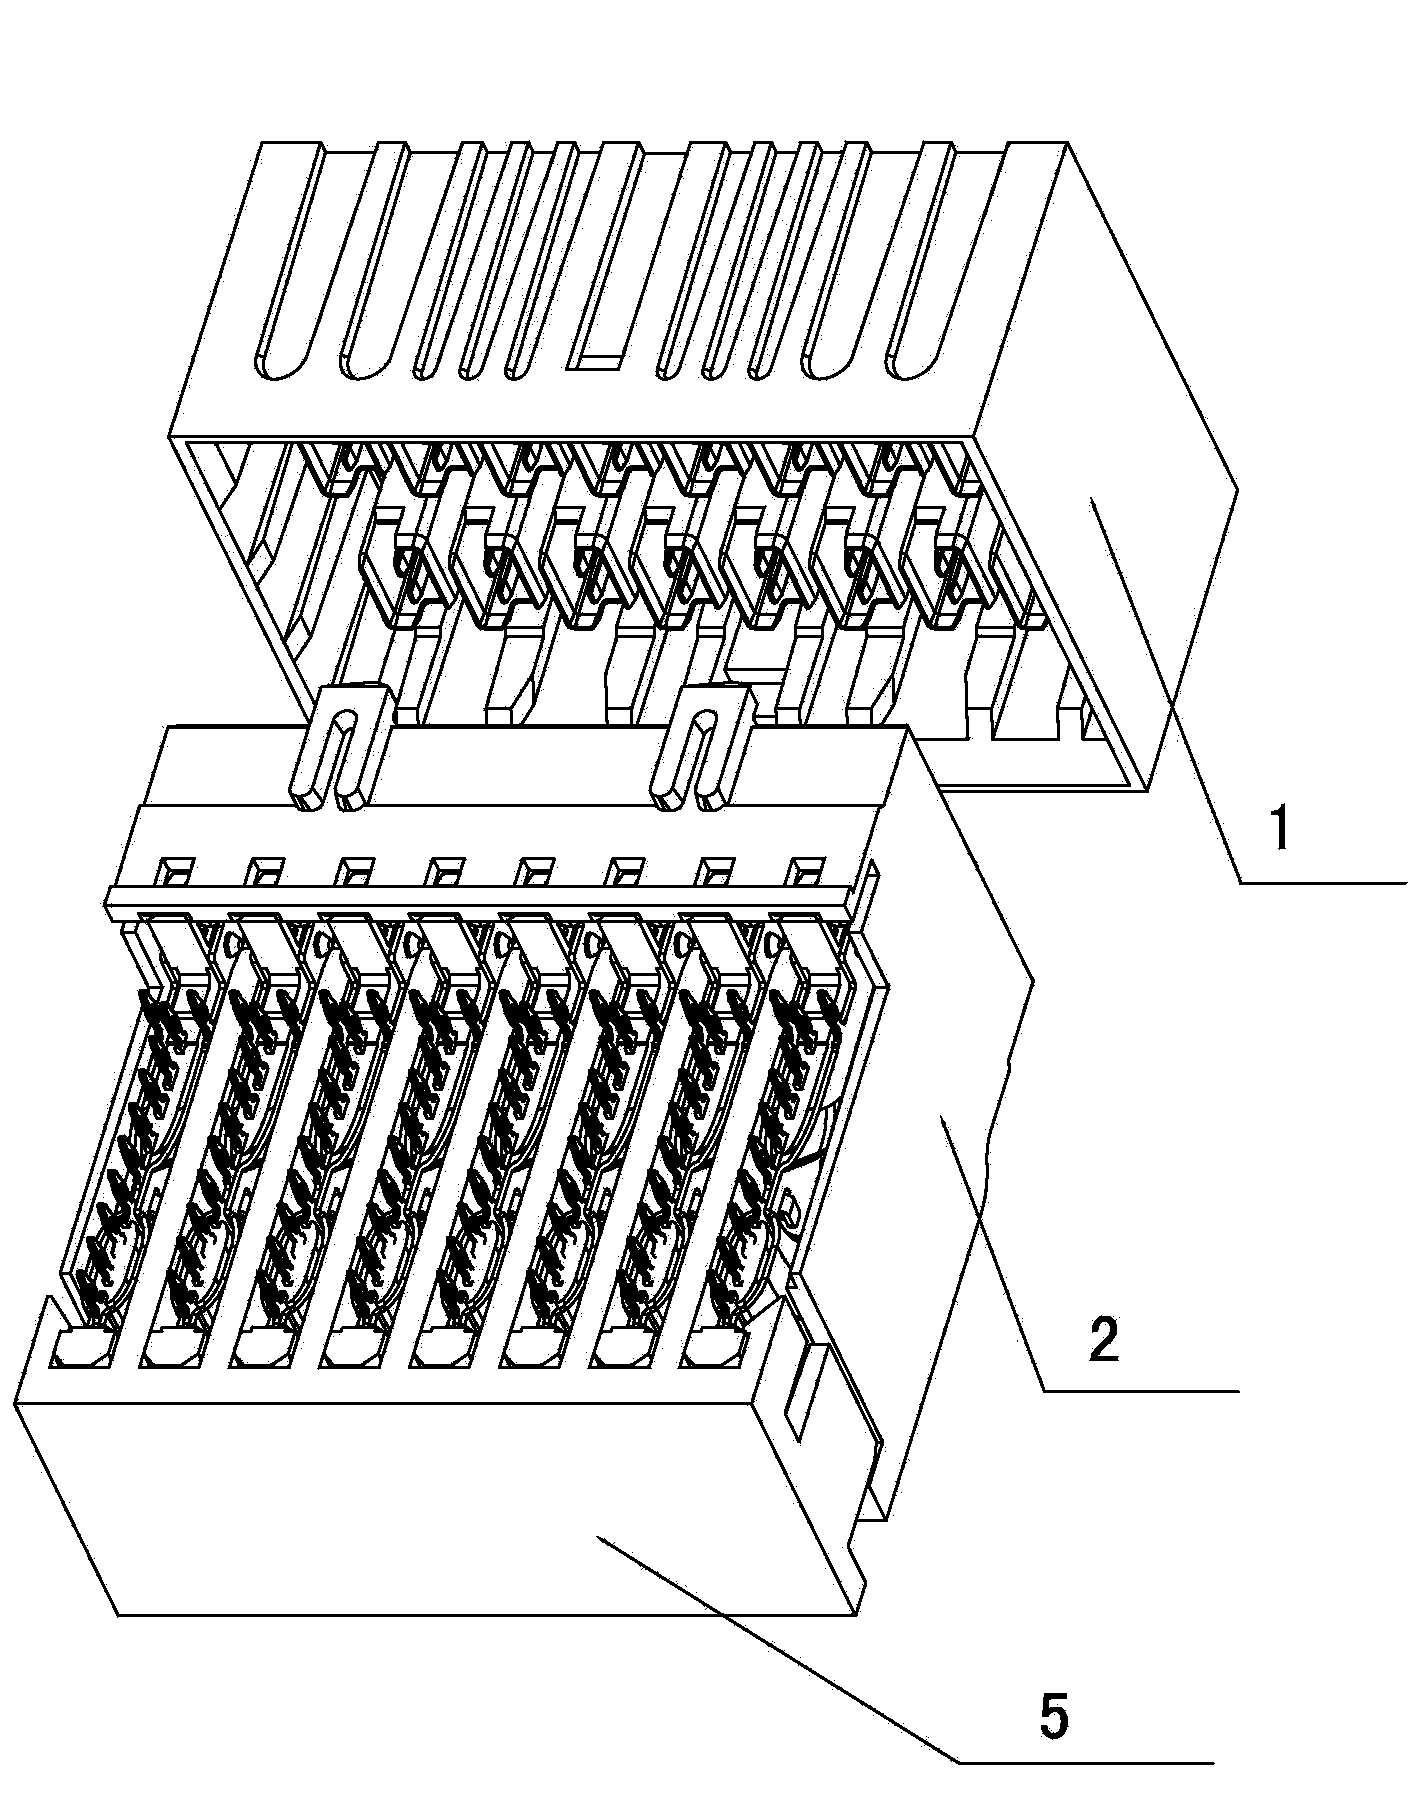 High-speed connector capable of transmitting 25G signals